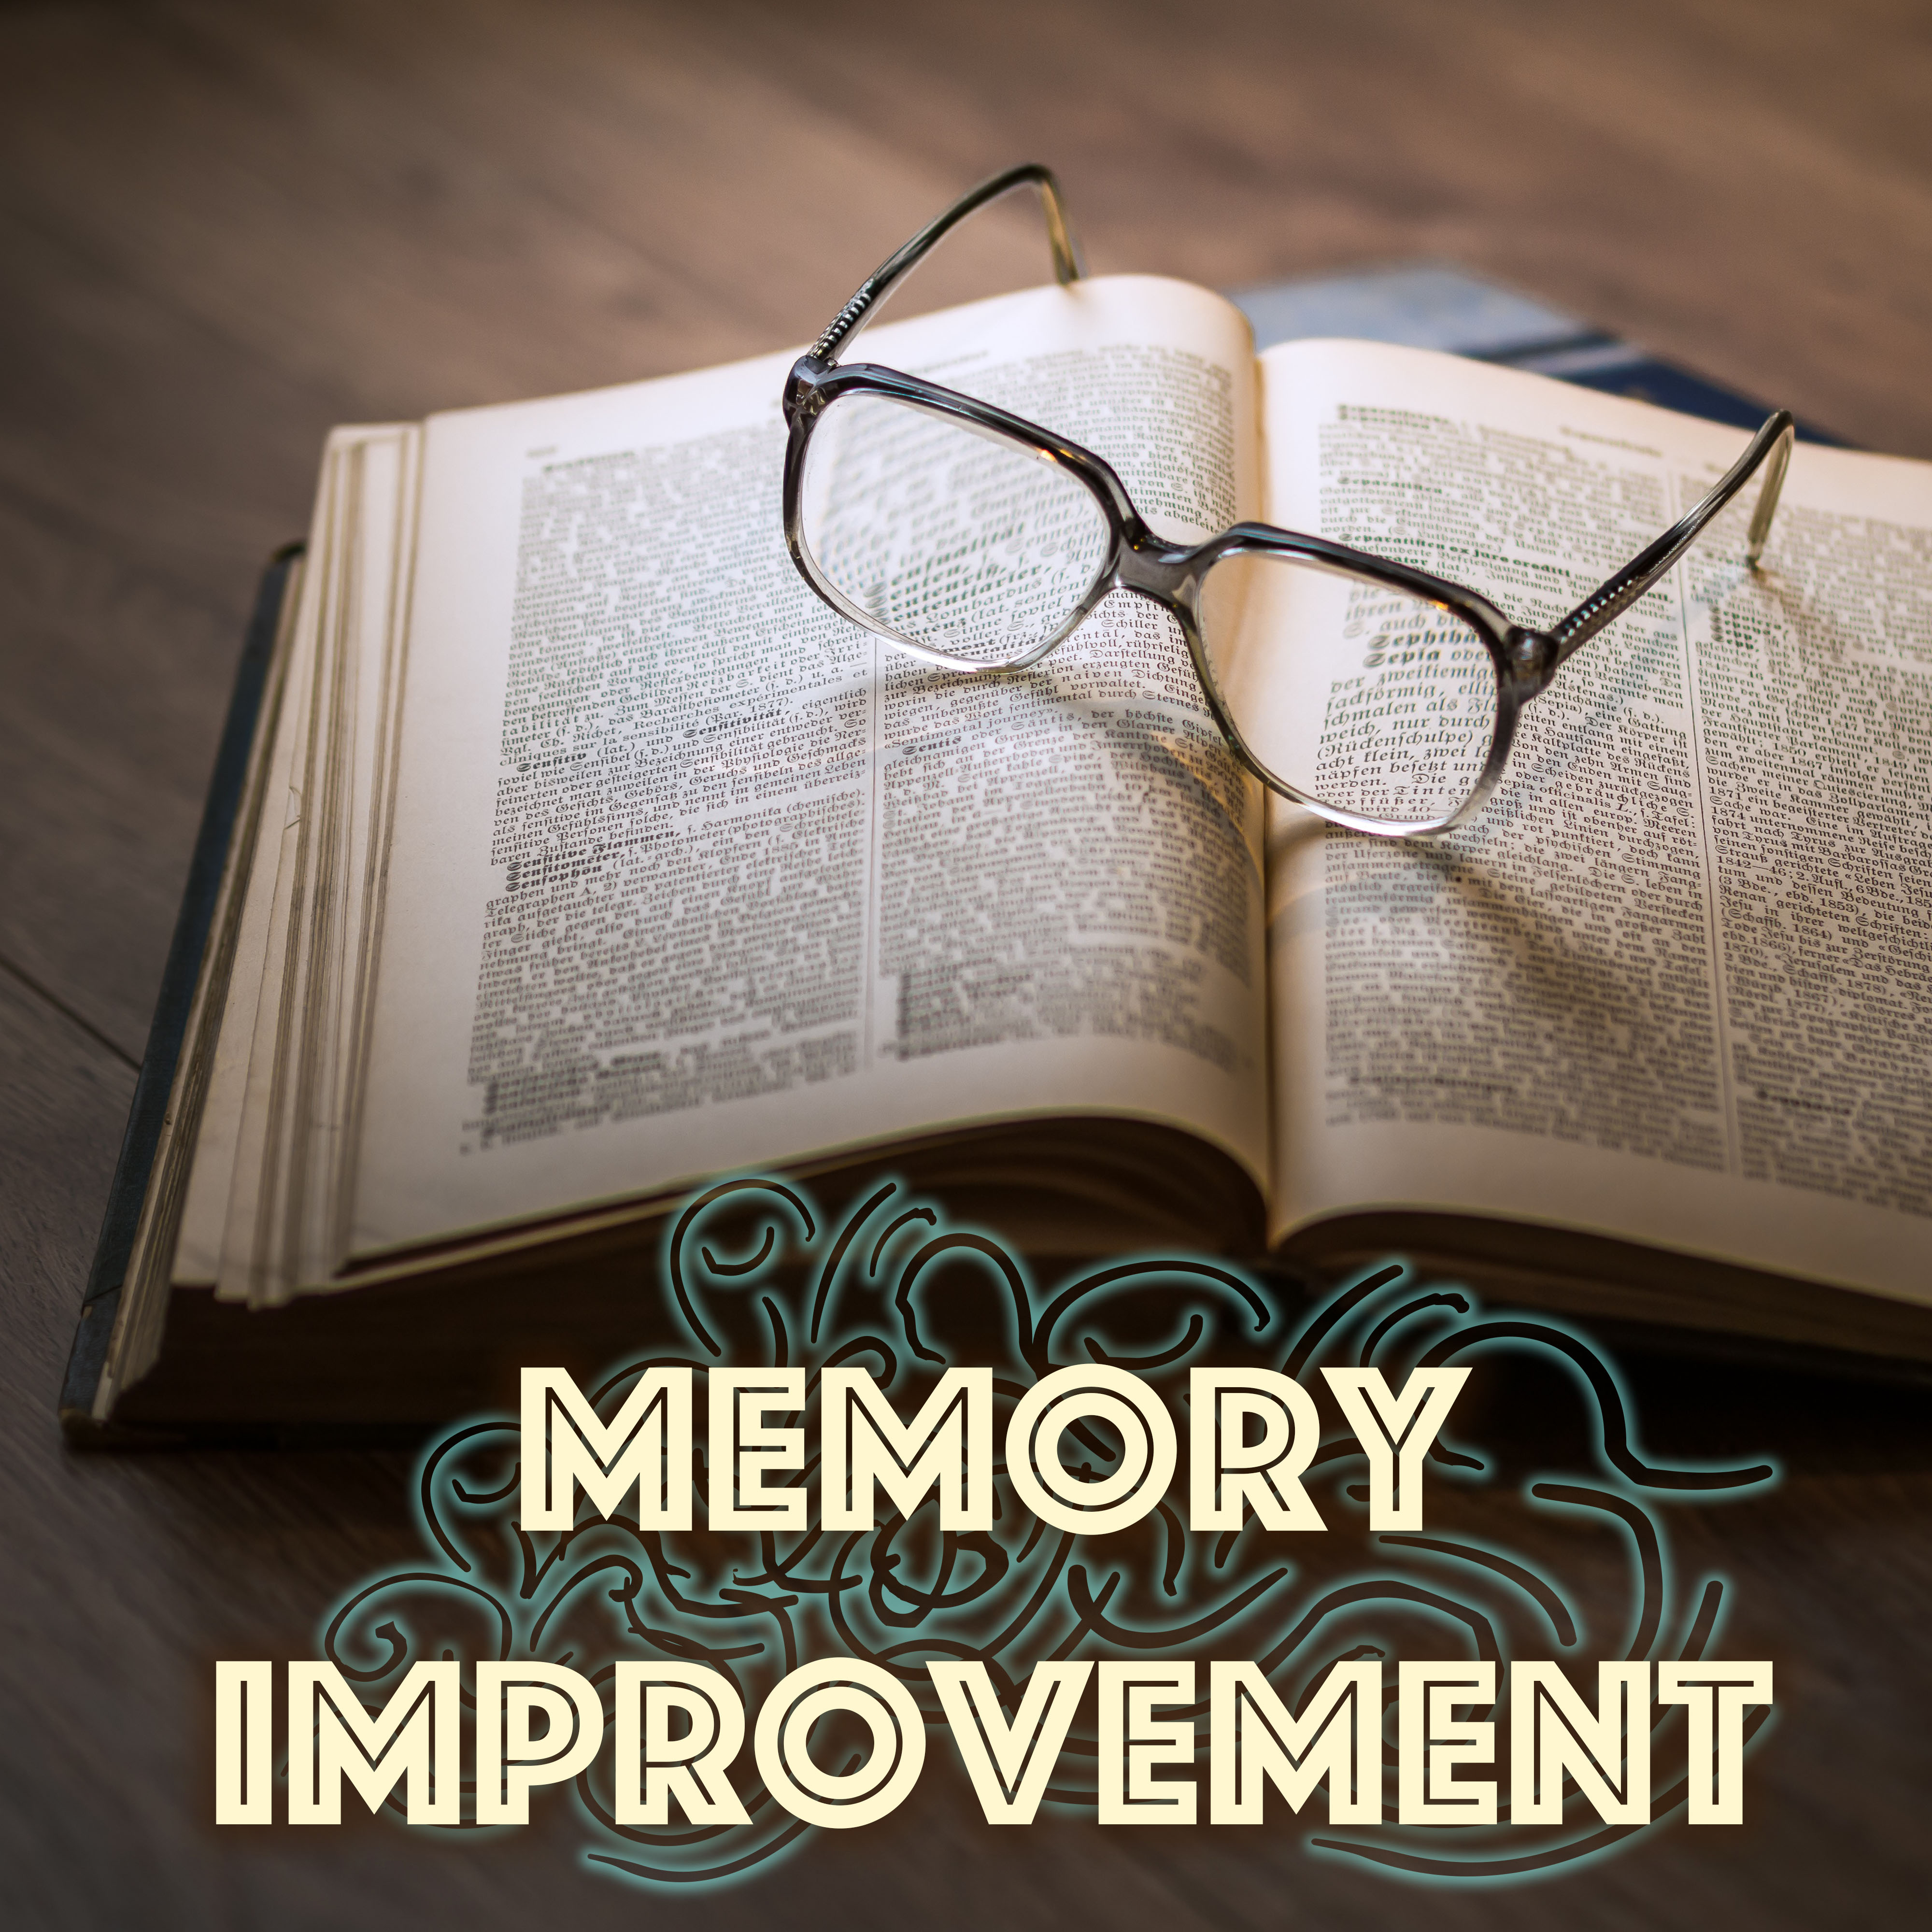 Memory Improvement - Deep Concentration Music, Sound Therapy for Study Aid & Exam Preparation